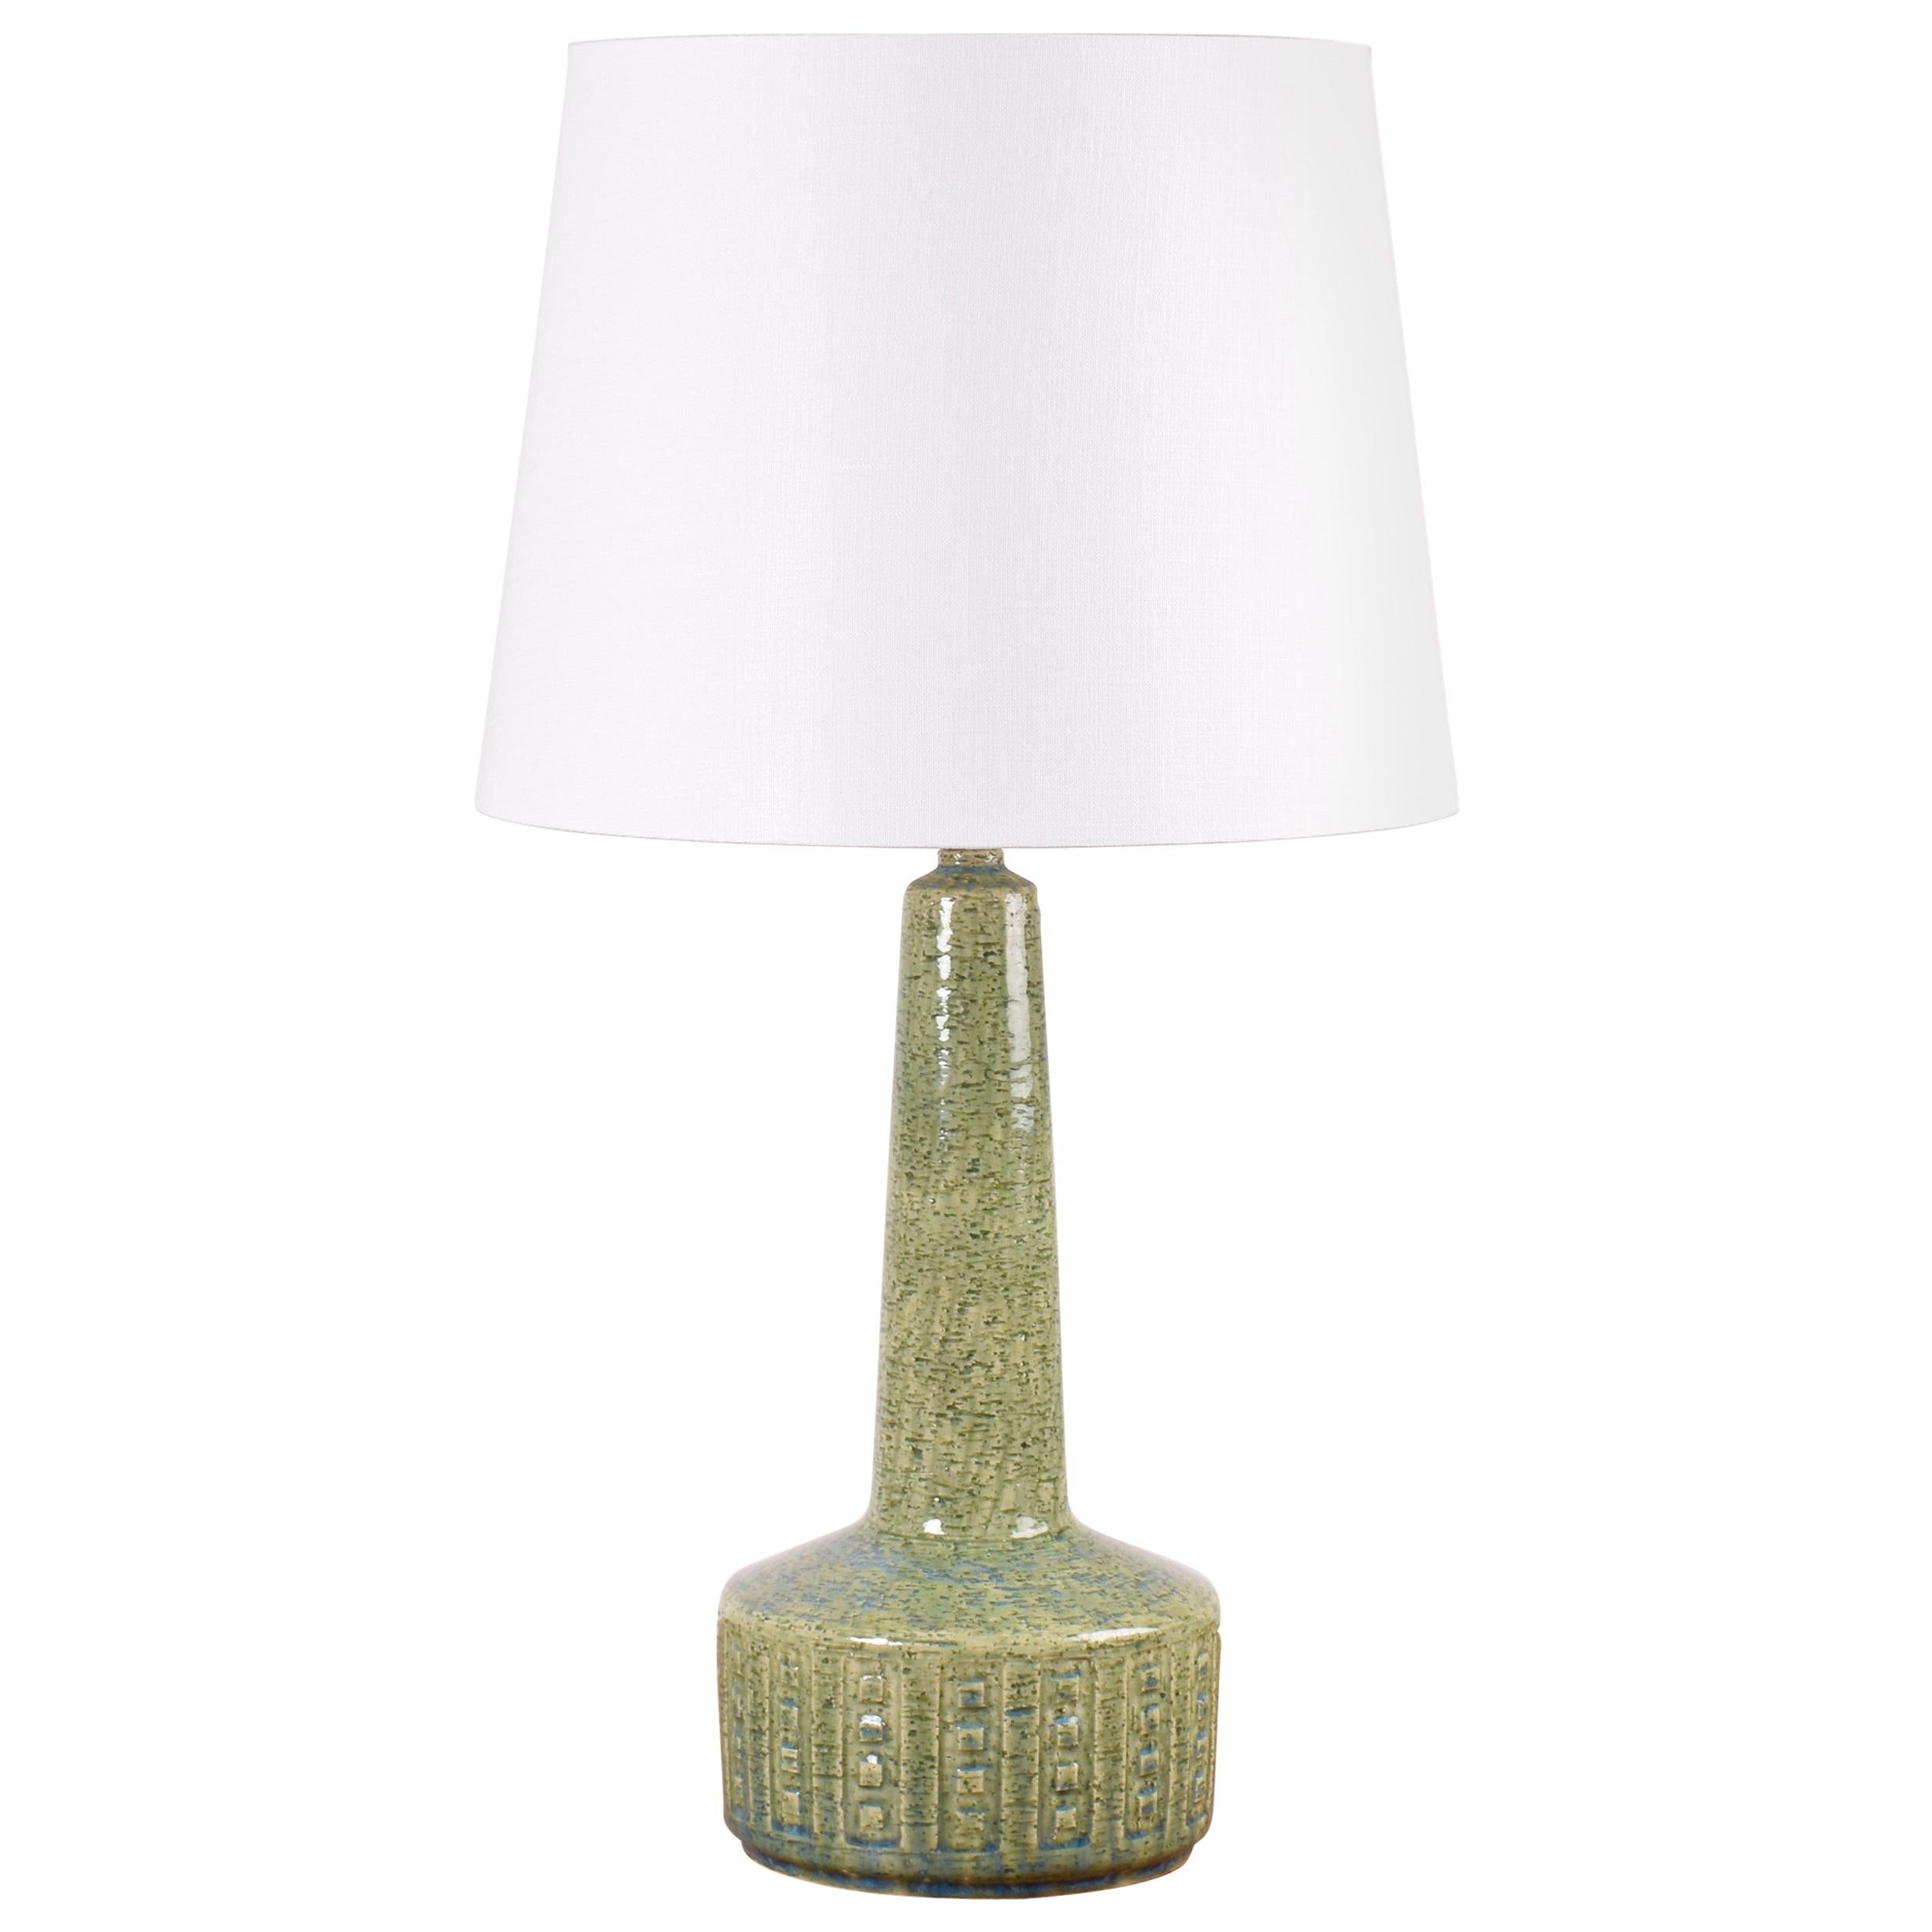 Danish Midcentury Palshus Tall Green Blue Table Lamp with New Lampshade, 1960s For Sale